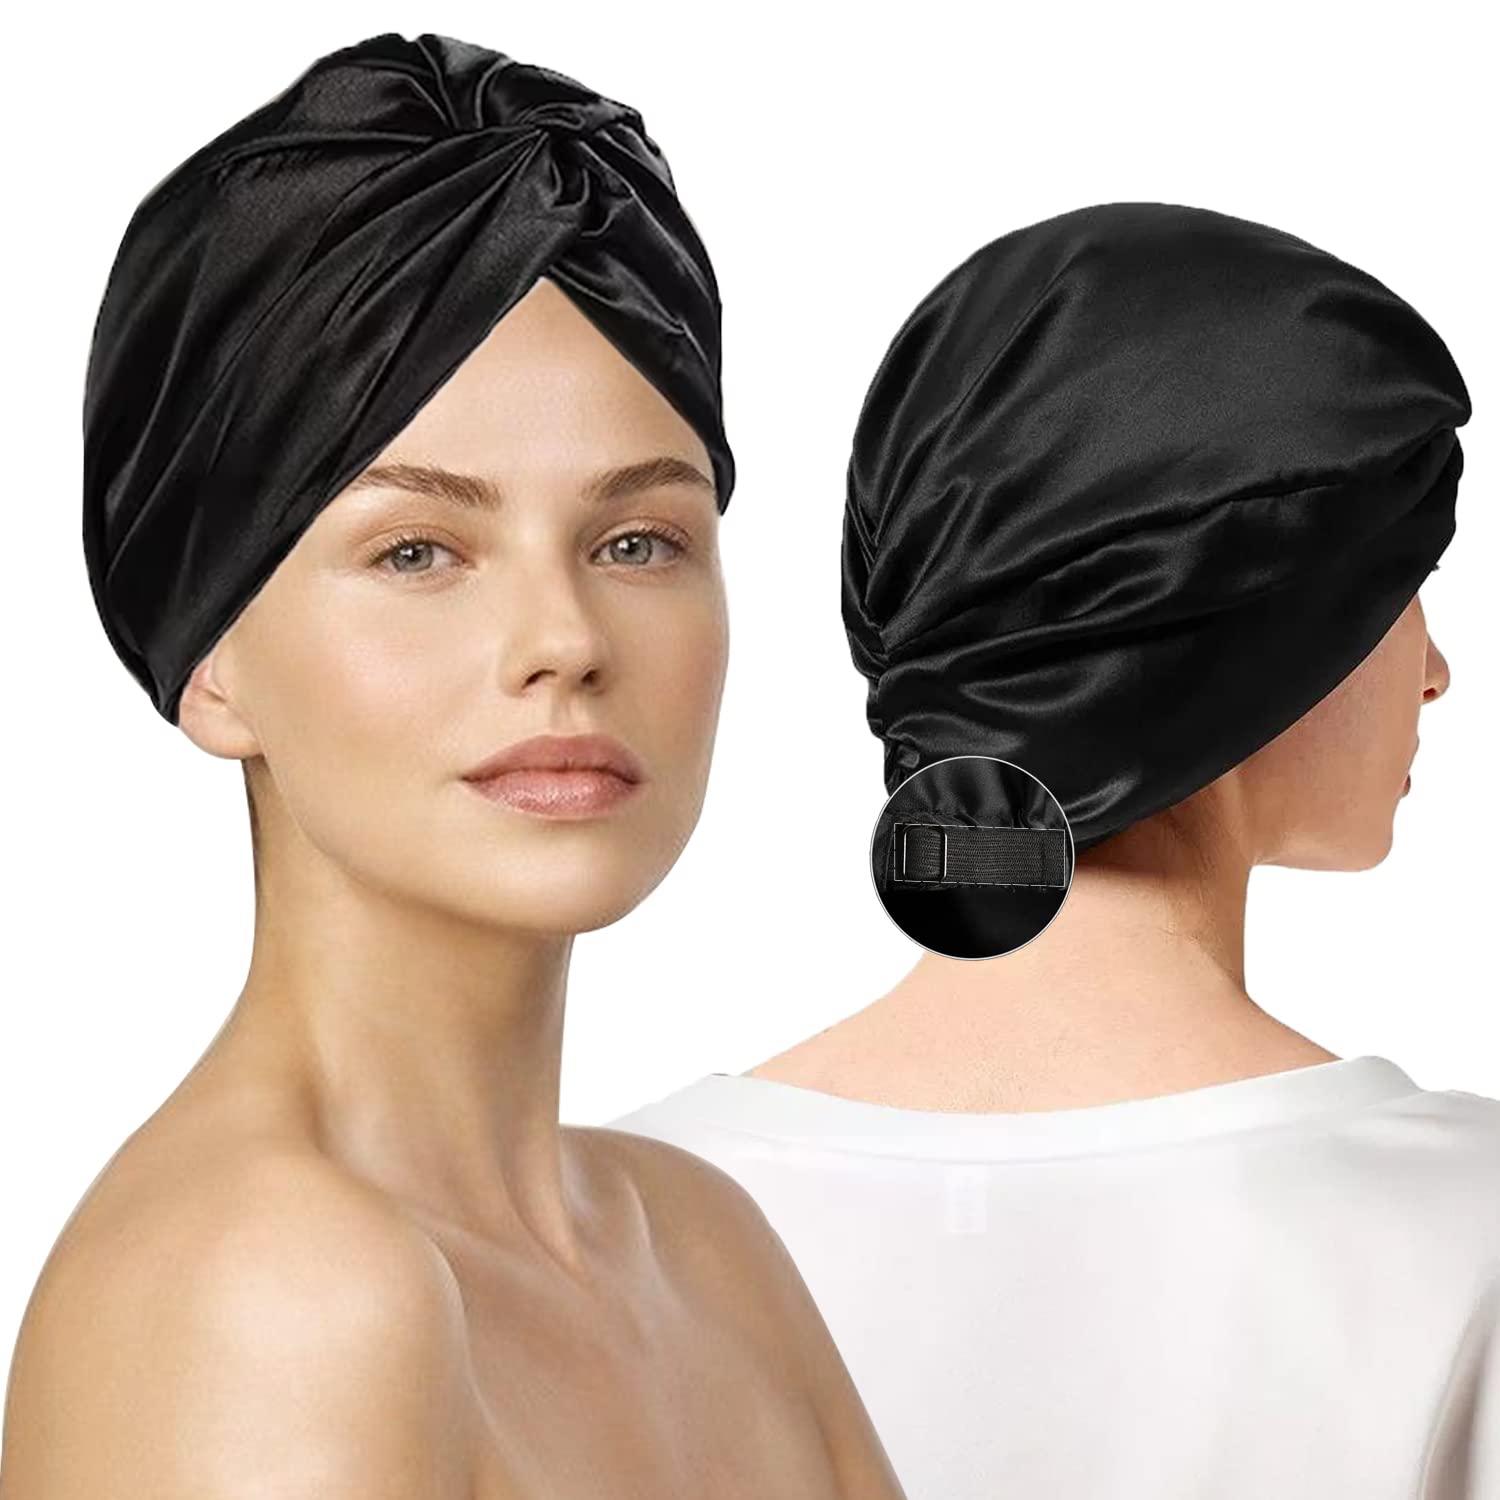 HOW TO MAKE A SATIN BONNET WITHOUT ELASTIC